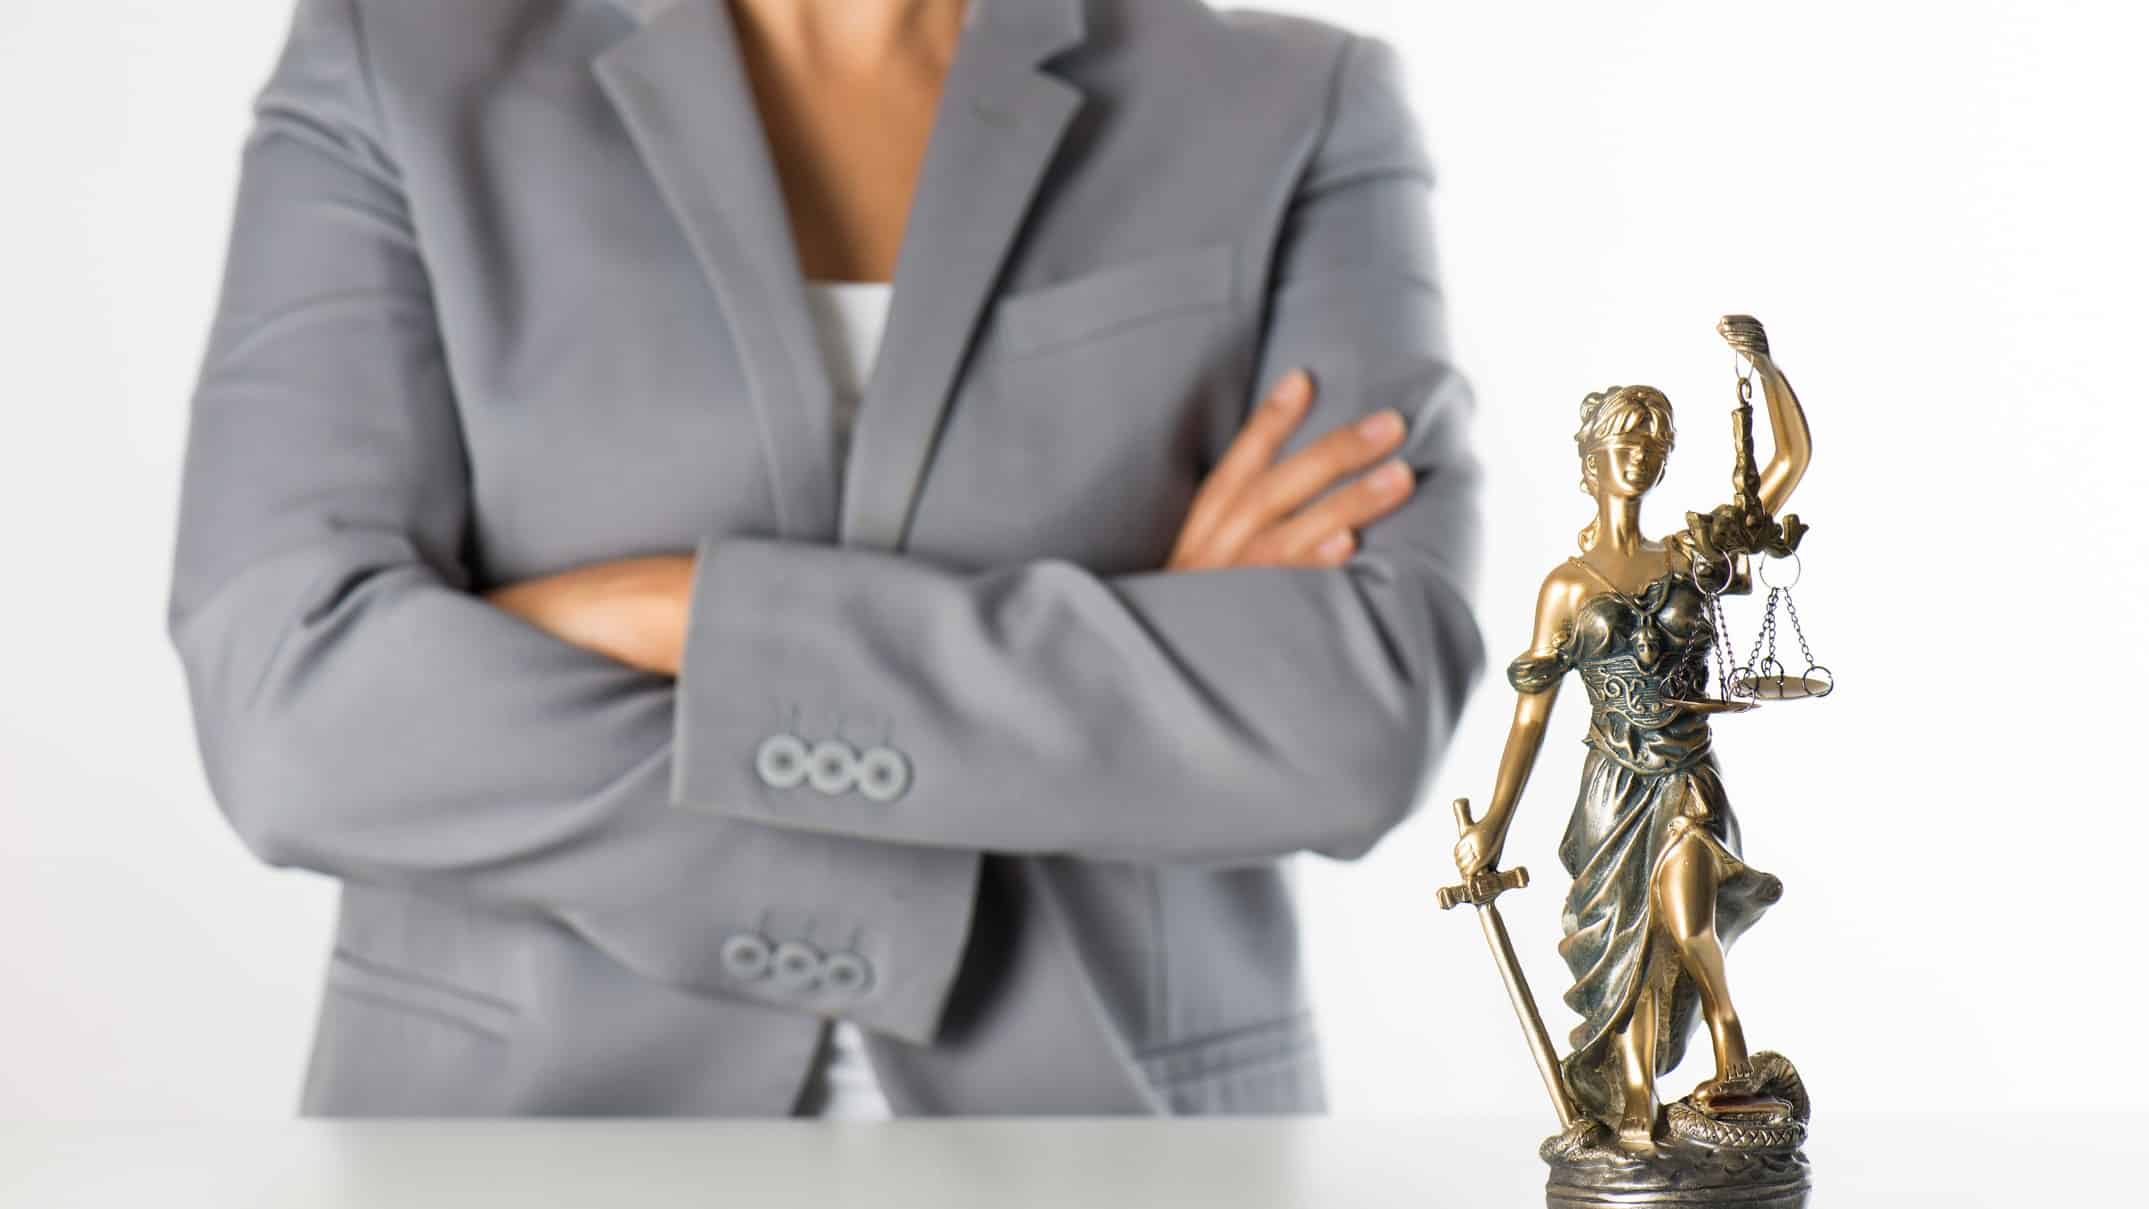 a woman in a business suit stands with her arms folded in the background of a statue of lady justice wearing robes, carrying a sword and holding the scales of justice.